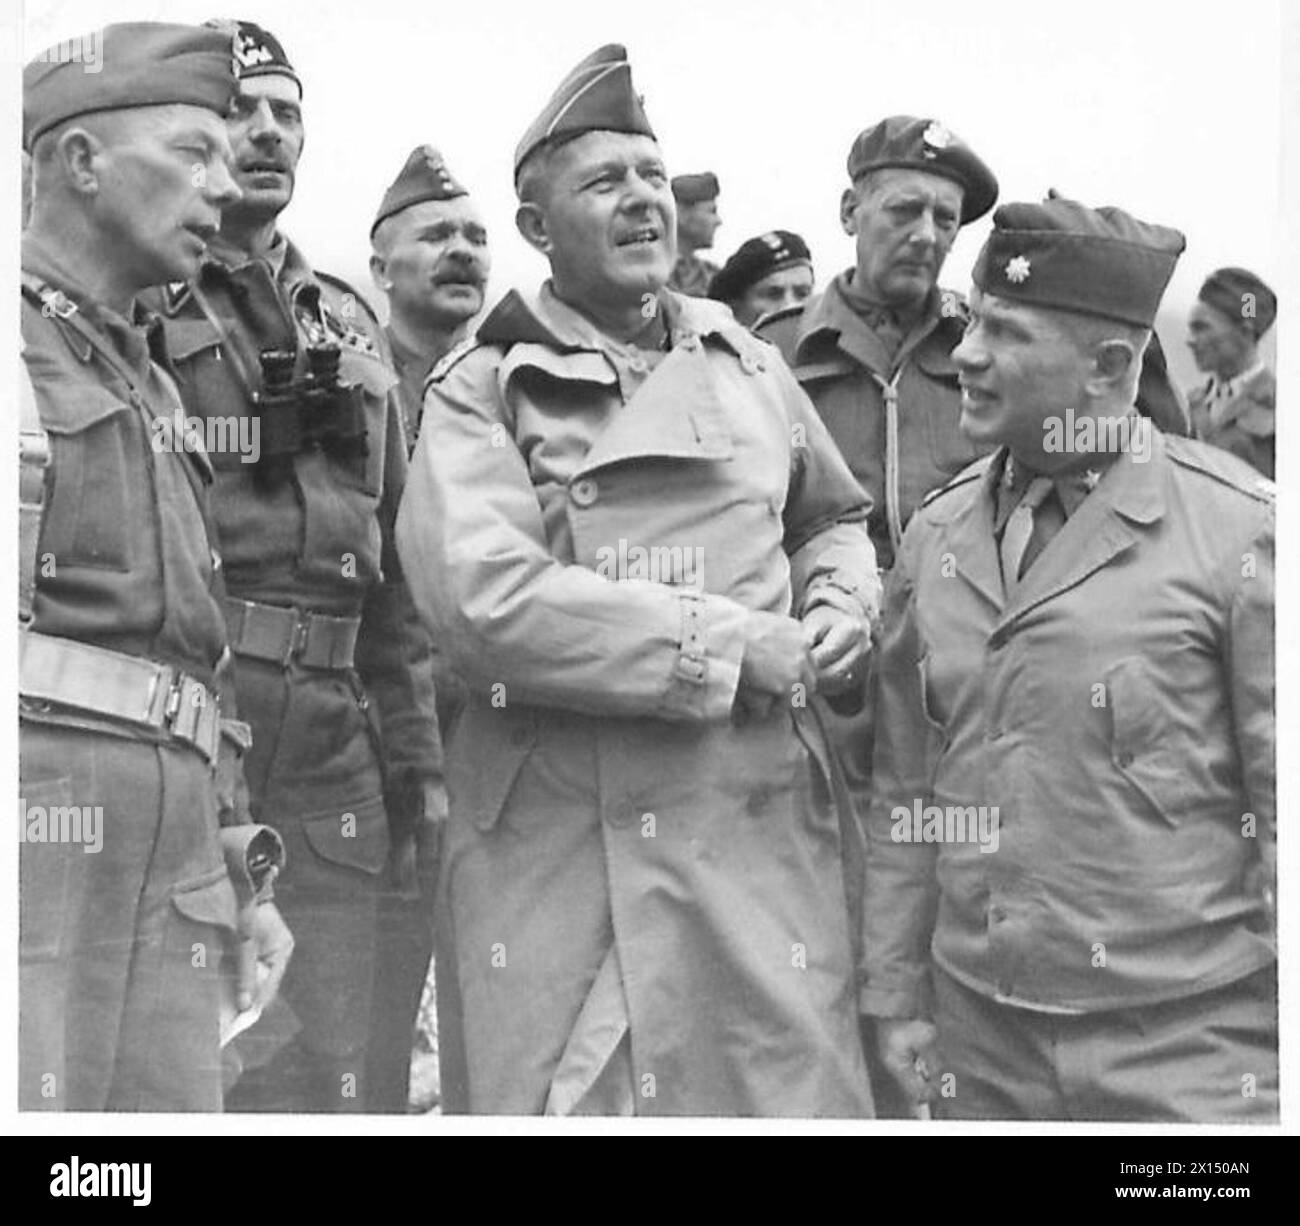 ALLIED ARMIES IN THE ITALIAN CAMPAIGN, 1943-1945 - From left to right in the foreground: unknown Polish officer, General Władysław Anders, the CO of the 2nd Corps, General Nikodem Sulik, the CO of the 5th Kresowa Division (with a moustache), General Jacob Devers, the Deputy Supreme Allied Commander of the Mediterranean Theatre, Lieutenant Eugeniusz Lubomirski, General Anders' adjutant and unknown American officer pause for a rest when climbing to an observation post to watch a small scale exercise by Polish infantry (probably soldiers of the 6th 'Lwów' Infantry Brigade).Photograph taken during Stock Photo